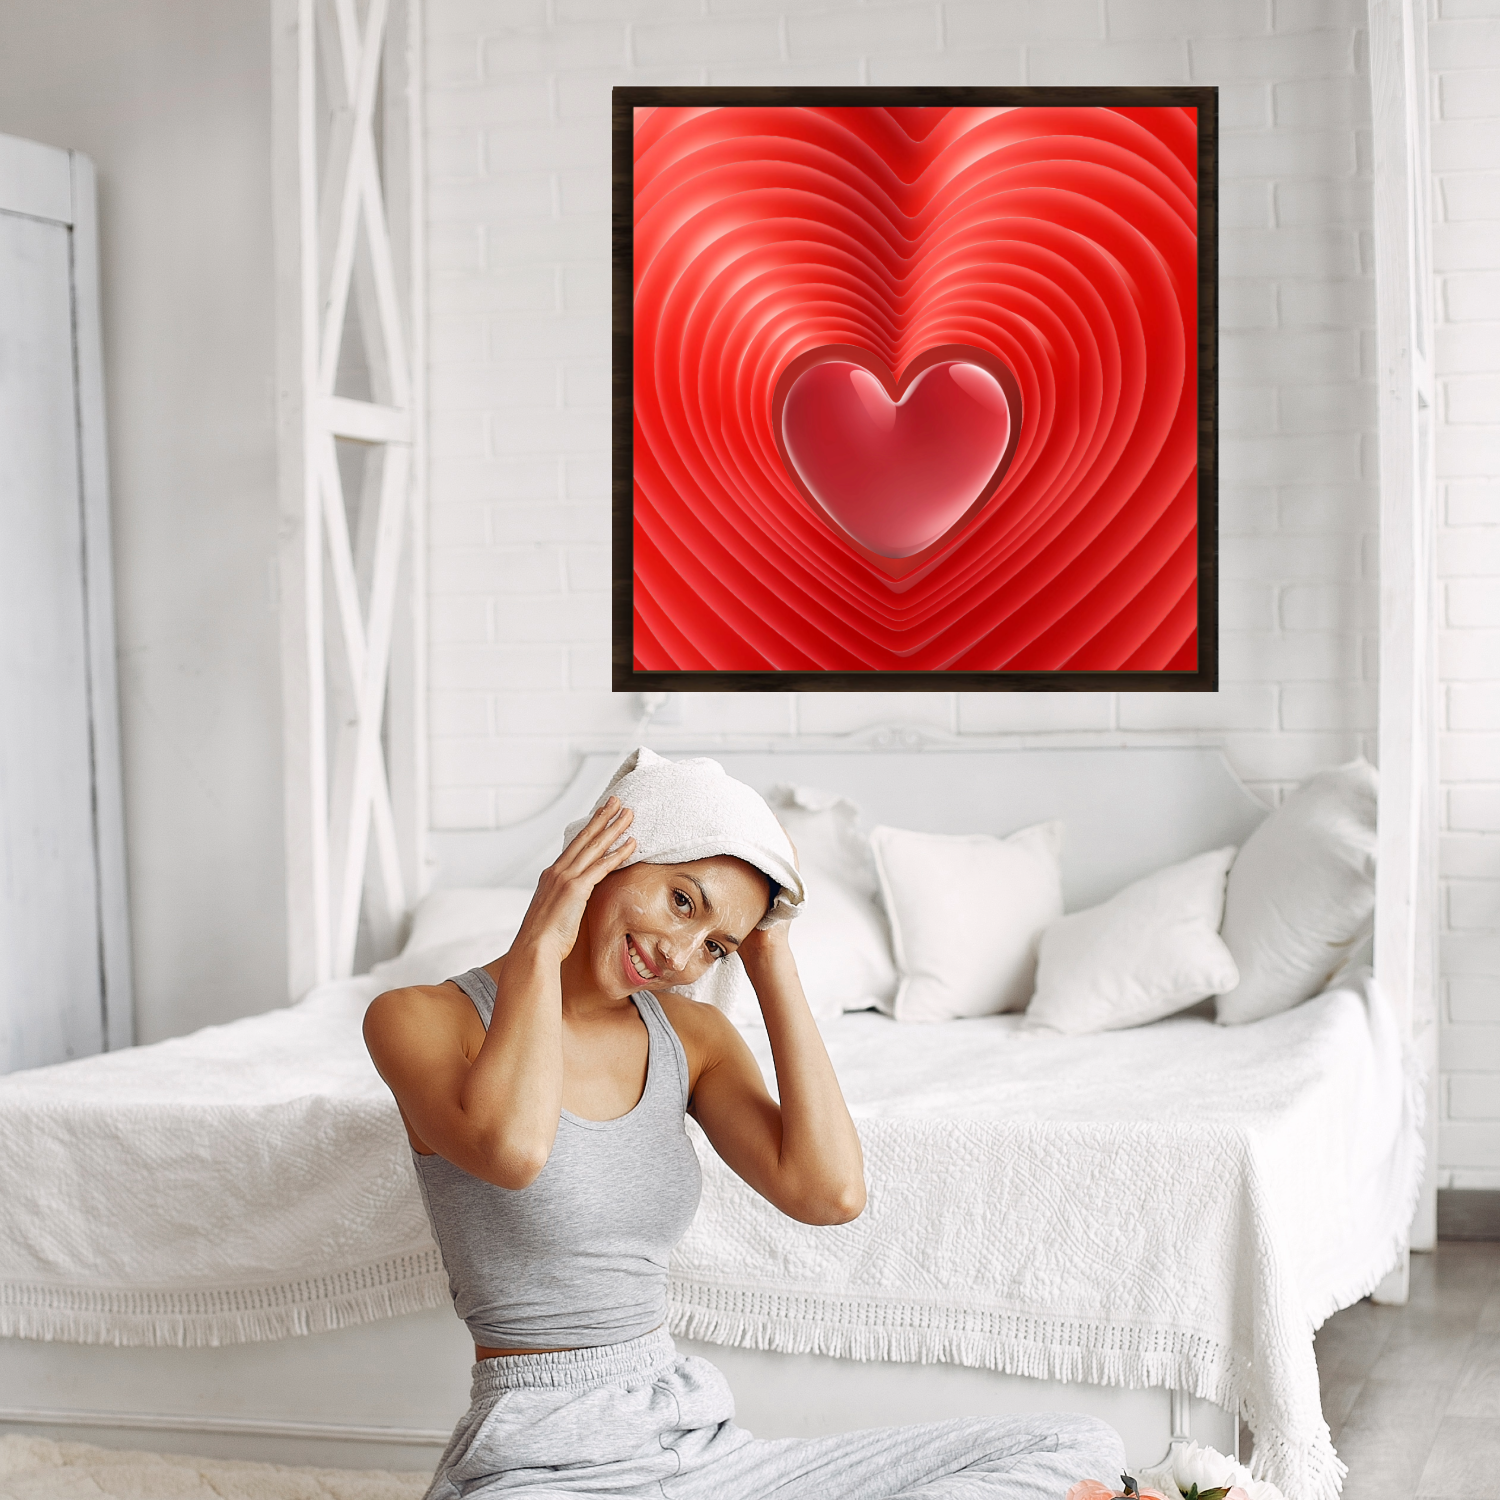 Wall Art INFINITE LOVE Canvas Print Painting Original Giclee 32X32 + Frame Love Nice Beauty Fun Design Fit Hot House Home Office Gift Ready Hang Living